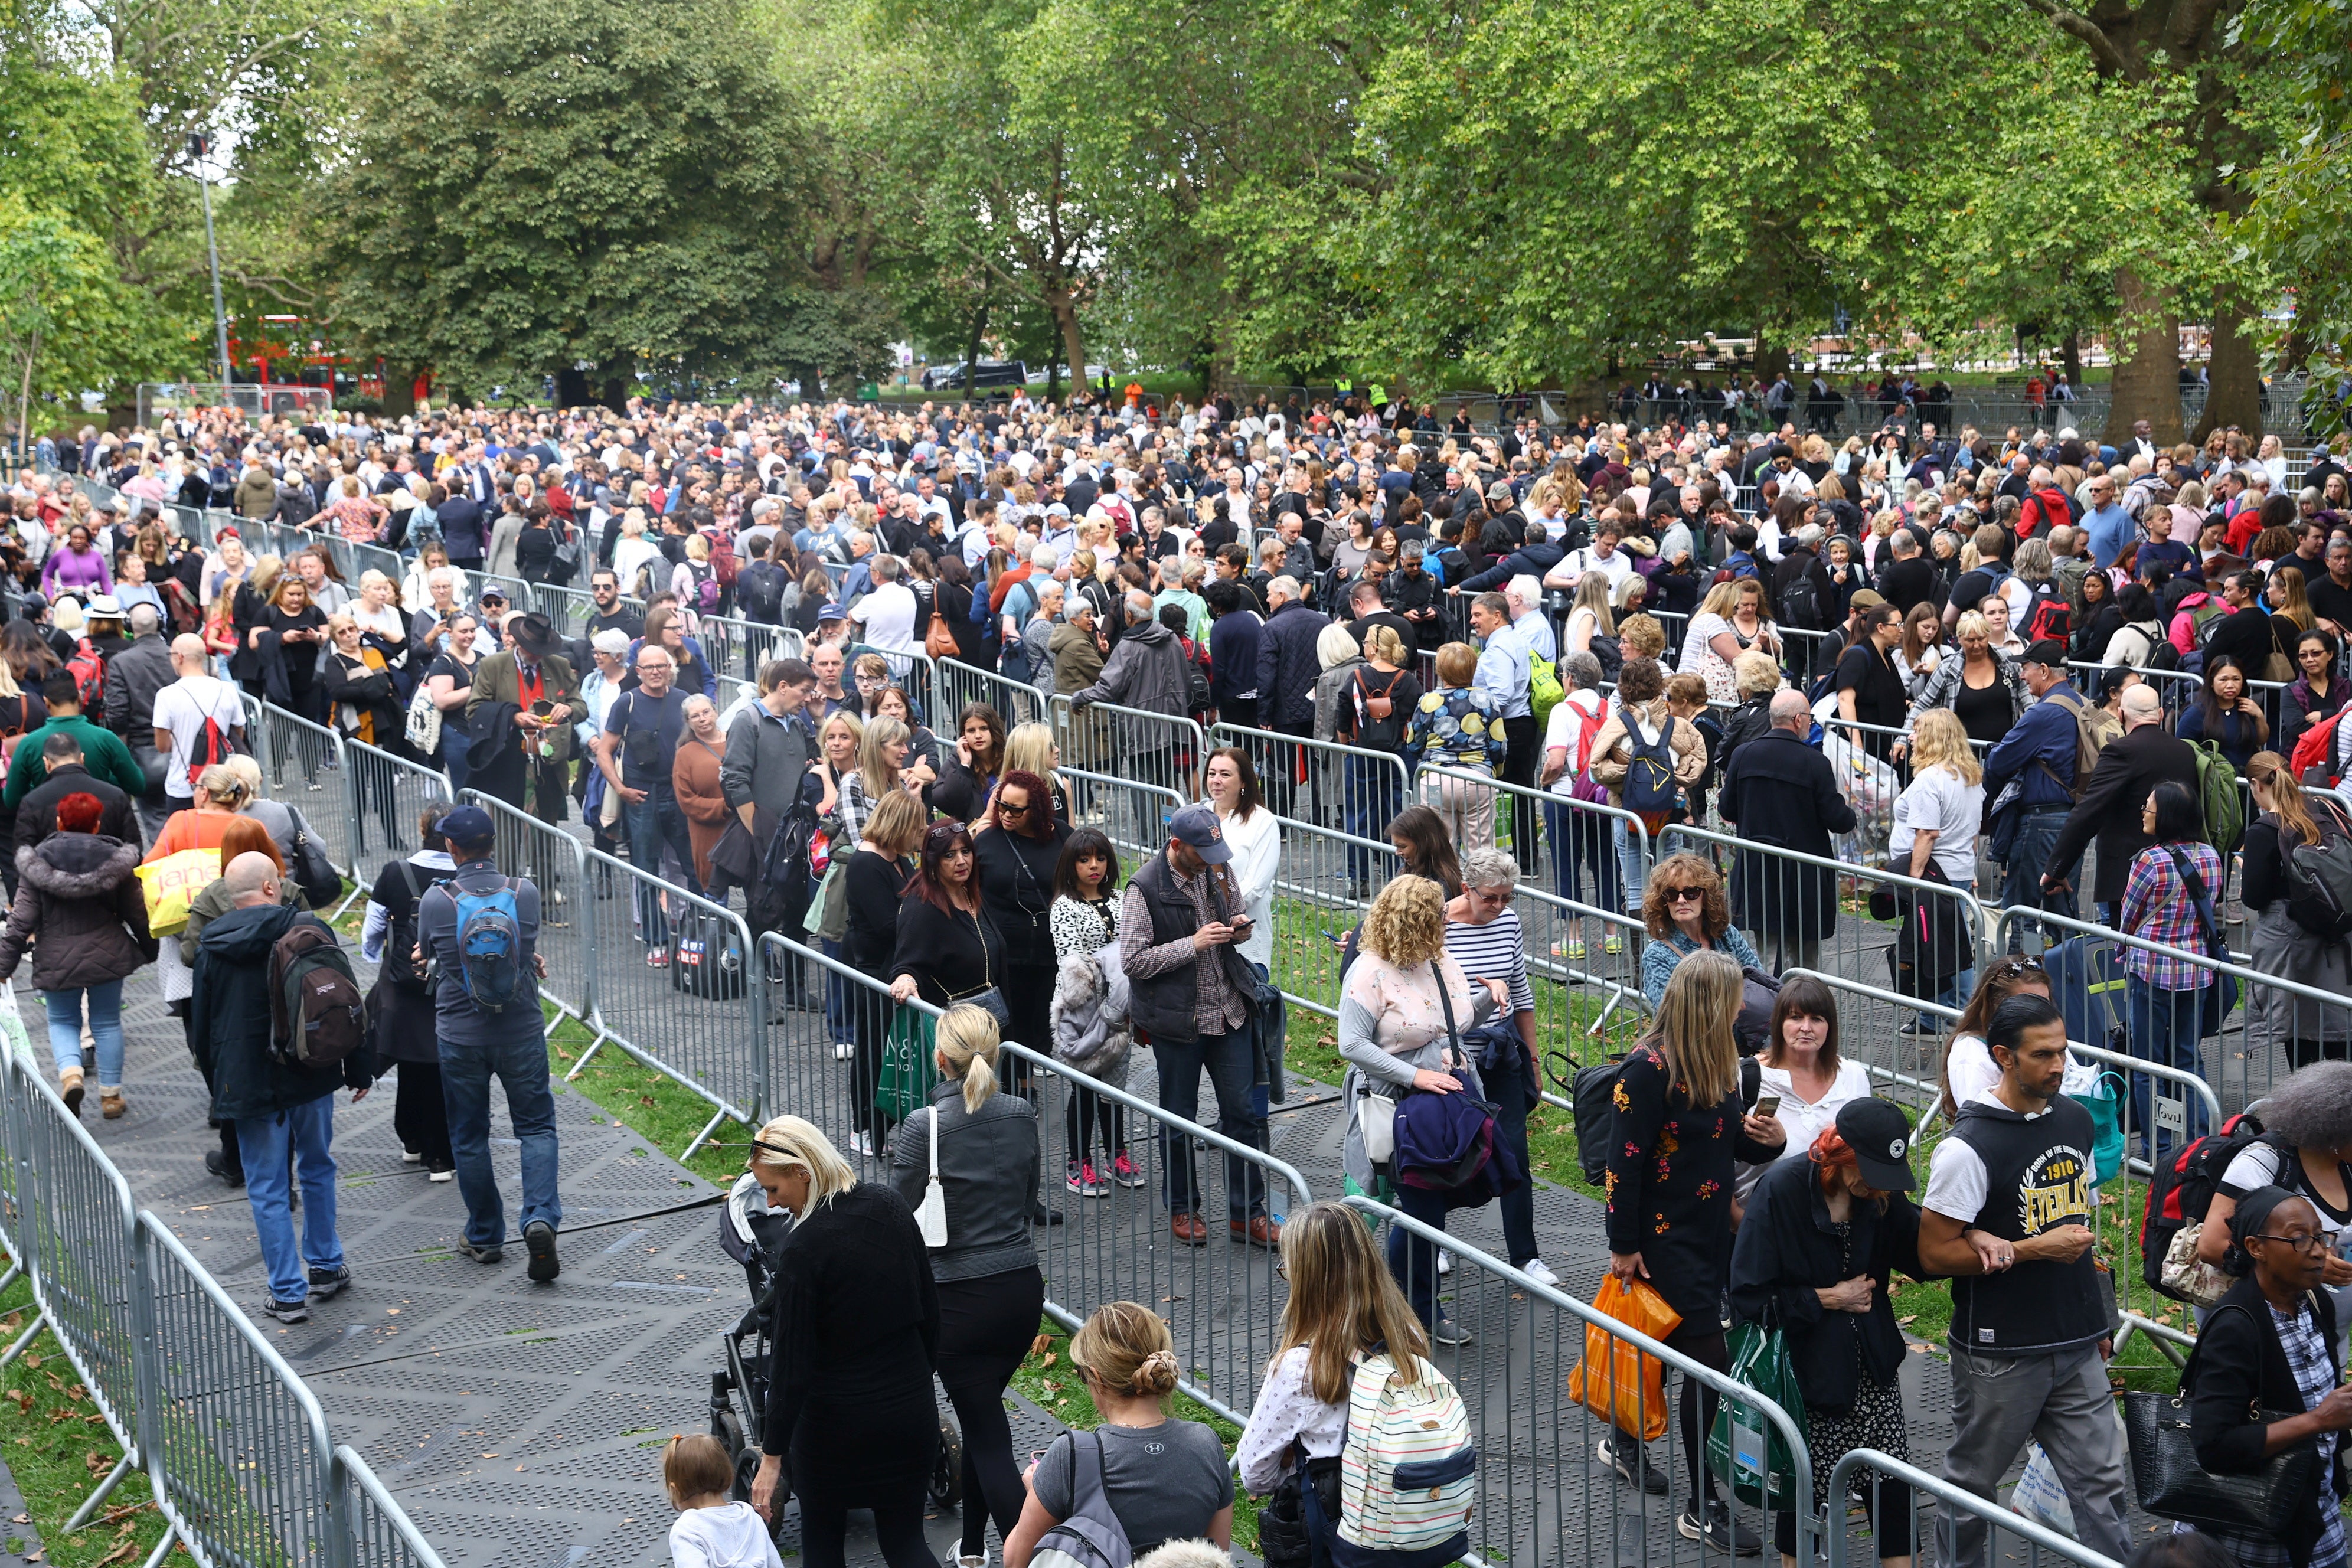 Mourners queue at Southwark Park to see the Queen’s coffin in Westminster Hall